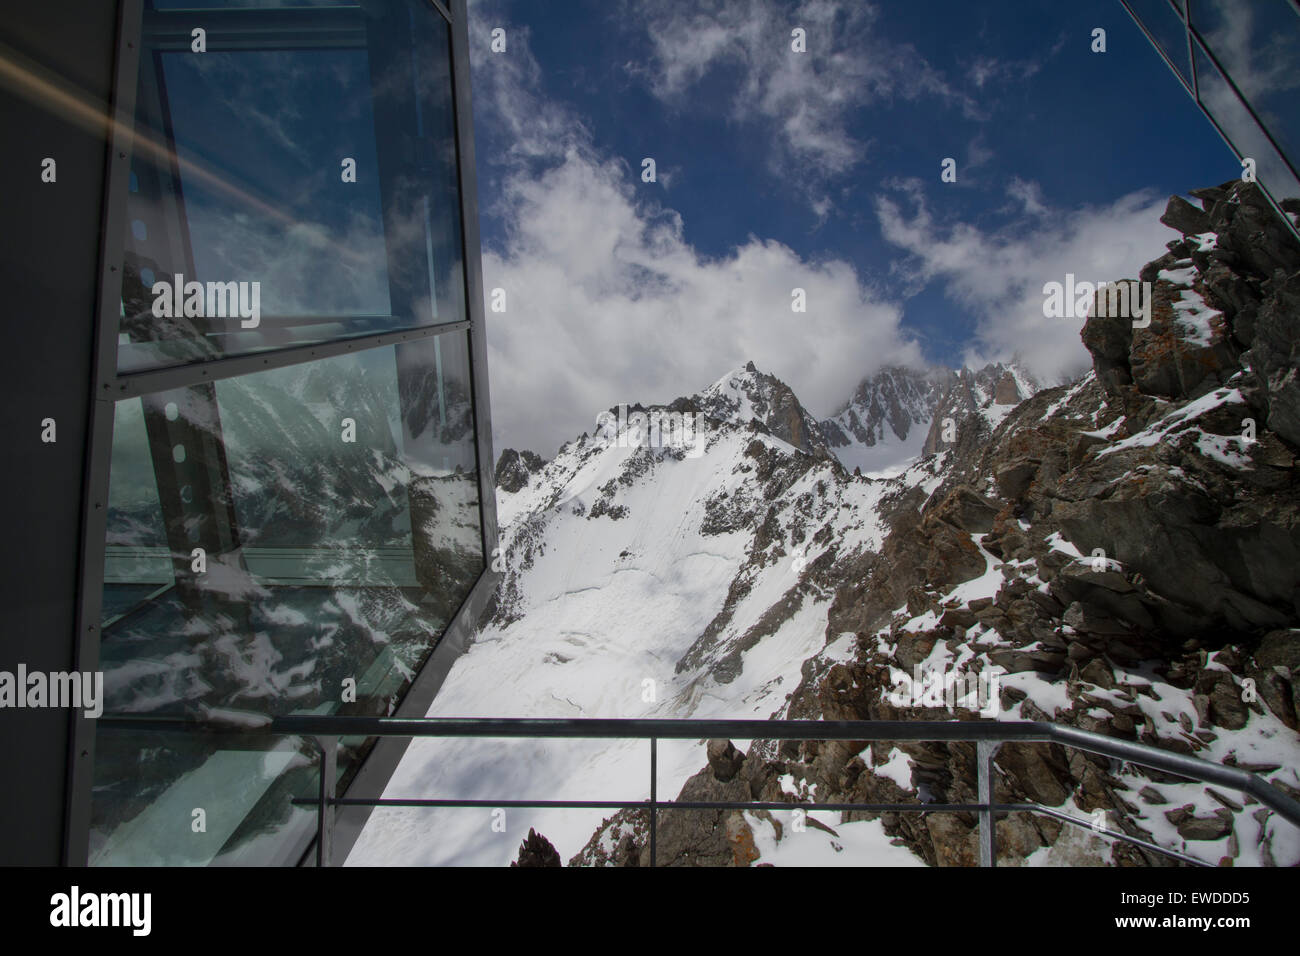 Courmayeur, Italy, 23rd June 2015. View from inside Pointe Helbronner station towards Mont Blanc (obscured by clouds). The Skyway cable car connects the city of Courmayeur to Pointe Helbronner (3,466 m) in the Mont Blanc massif. Stock Photo